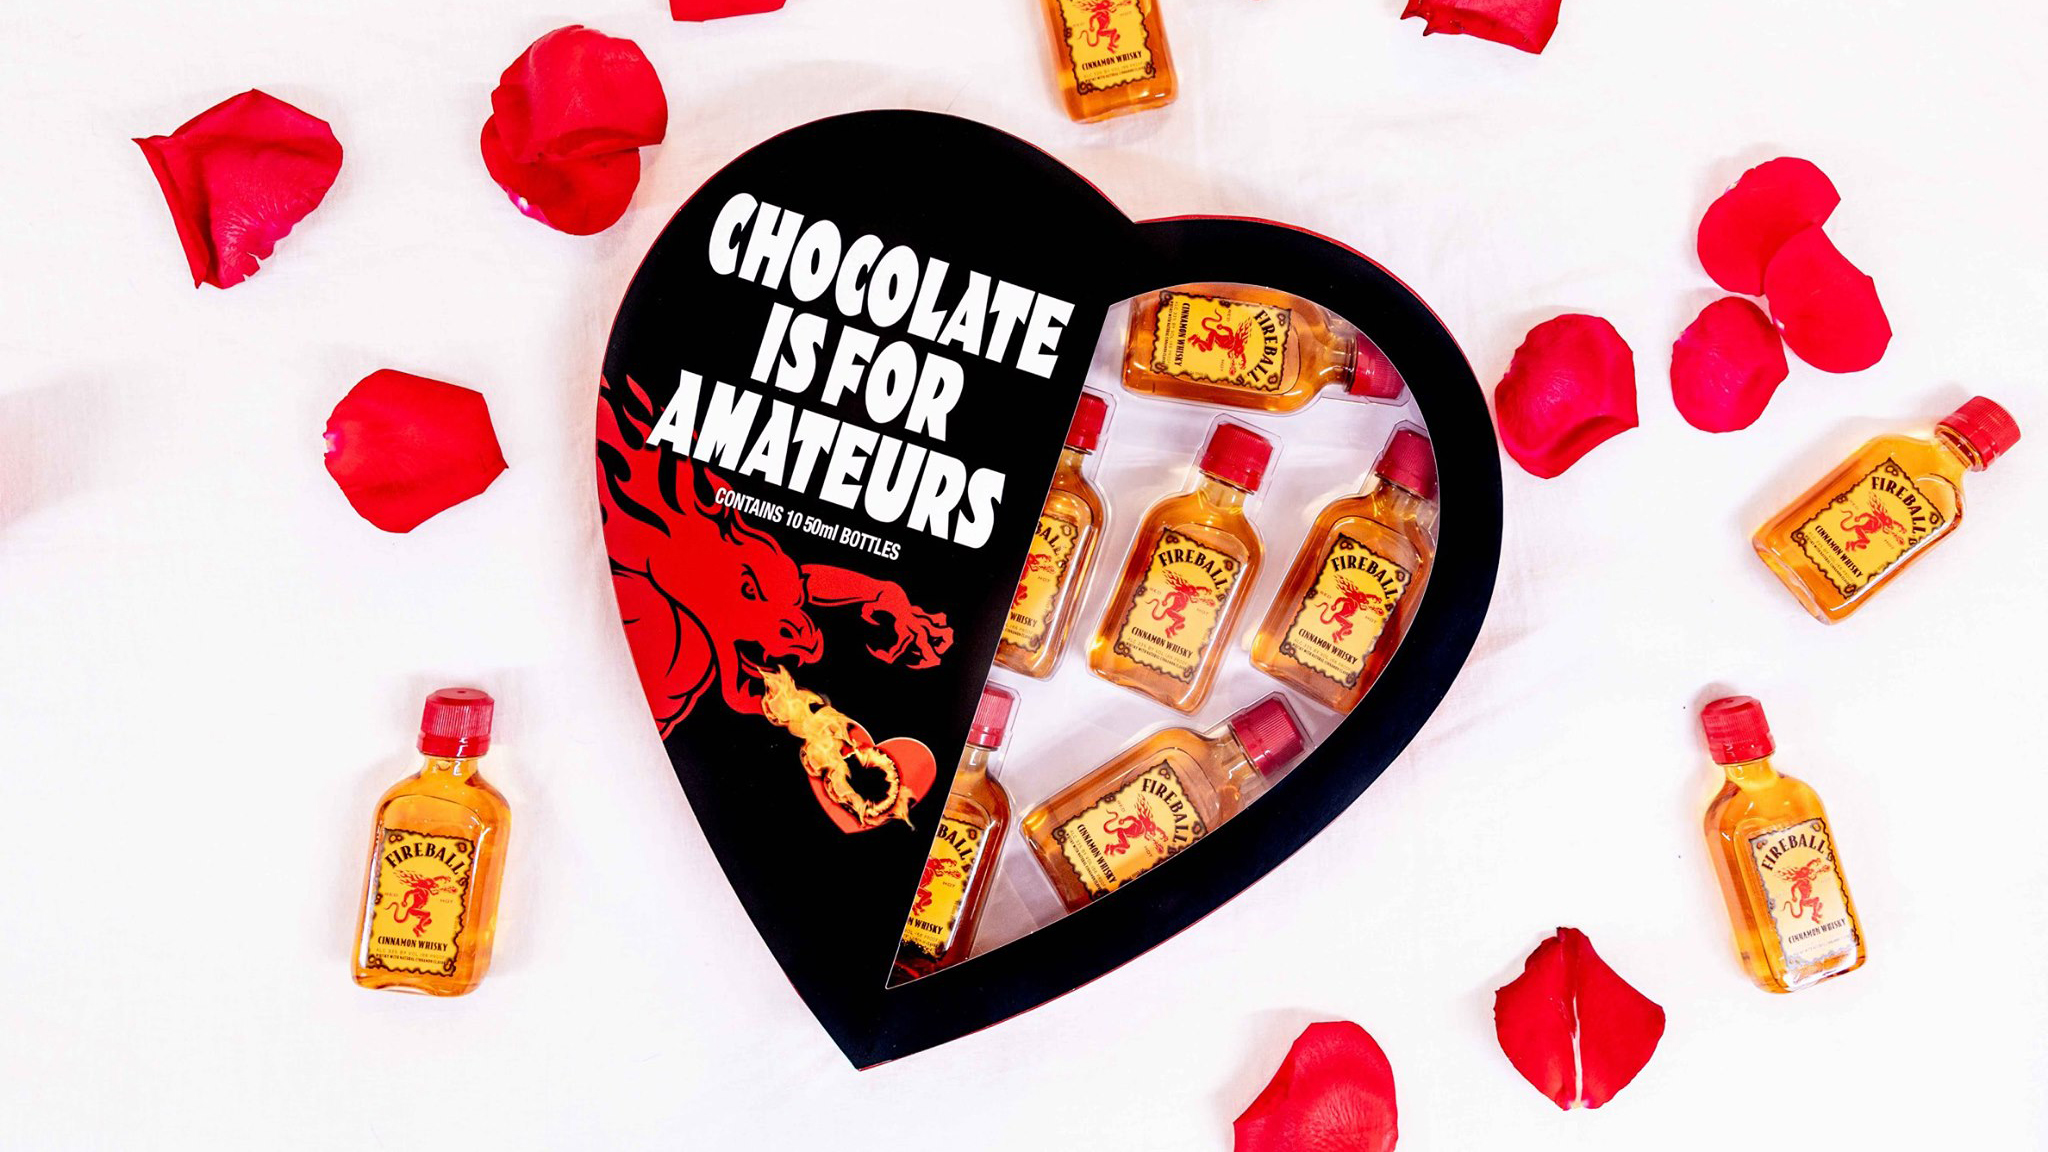 Fireball Unleashes “Chocolate Is For Amateurs” Heart-Shaped Valentine’s Day Boxes Filled With Whiskey Shooters